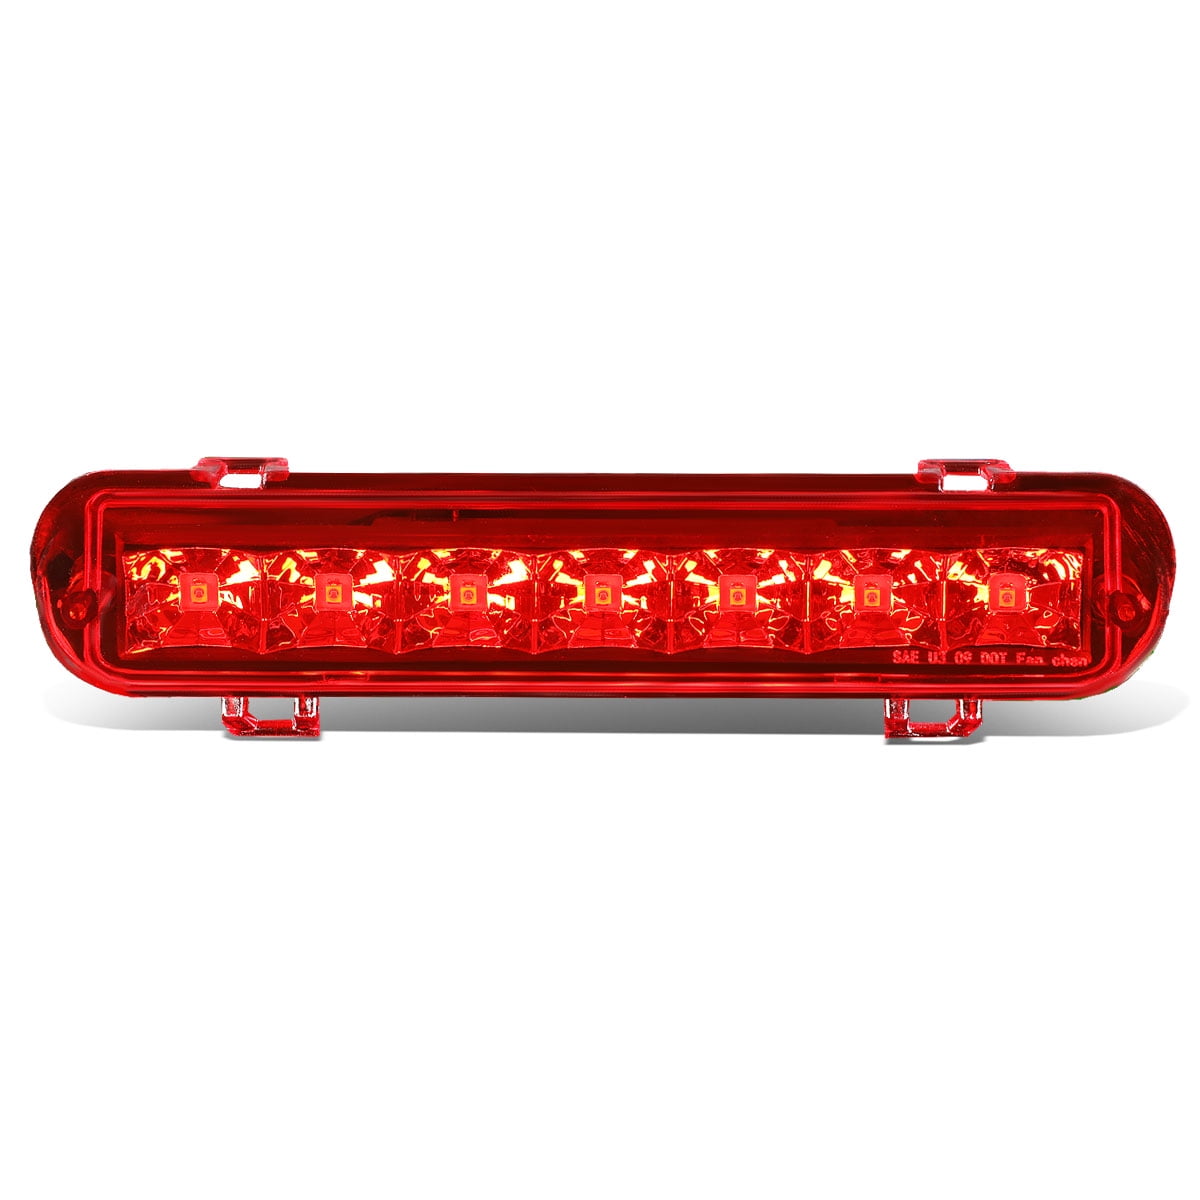 For 2009 to 2011 Ford Flex LED 3rd Third Tail Brake Light Rear Stop Lamp Red Housing 10 2011 Ford Flex Rear Turn Signal Bulb